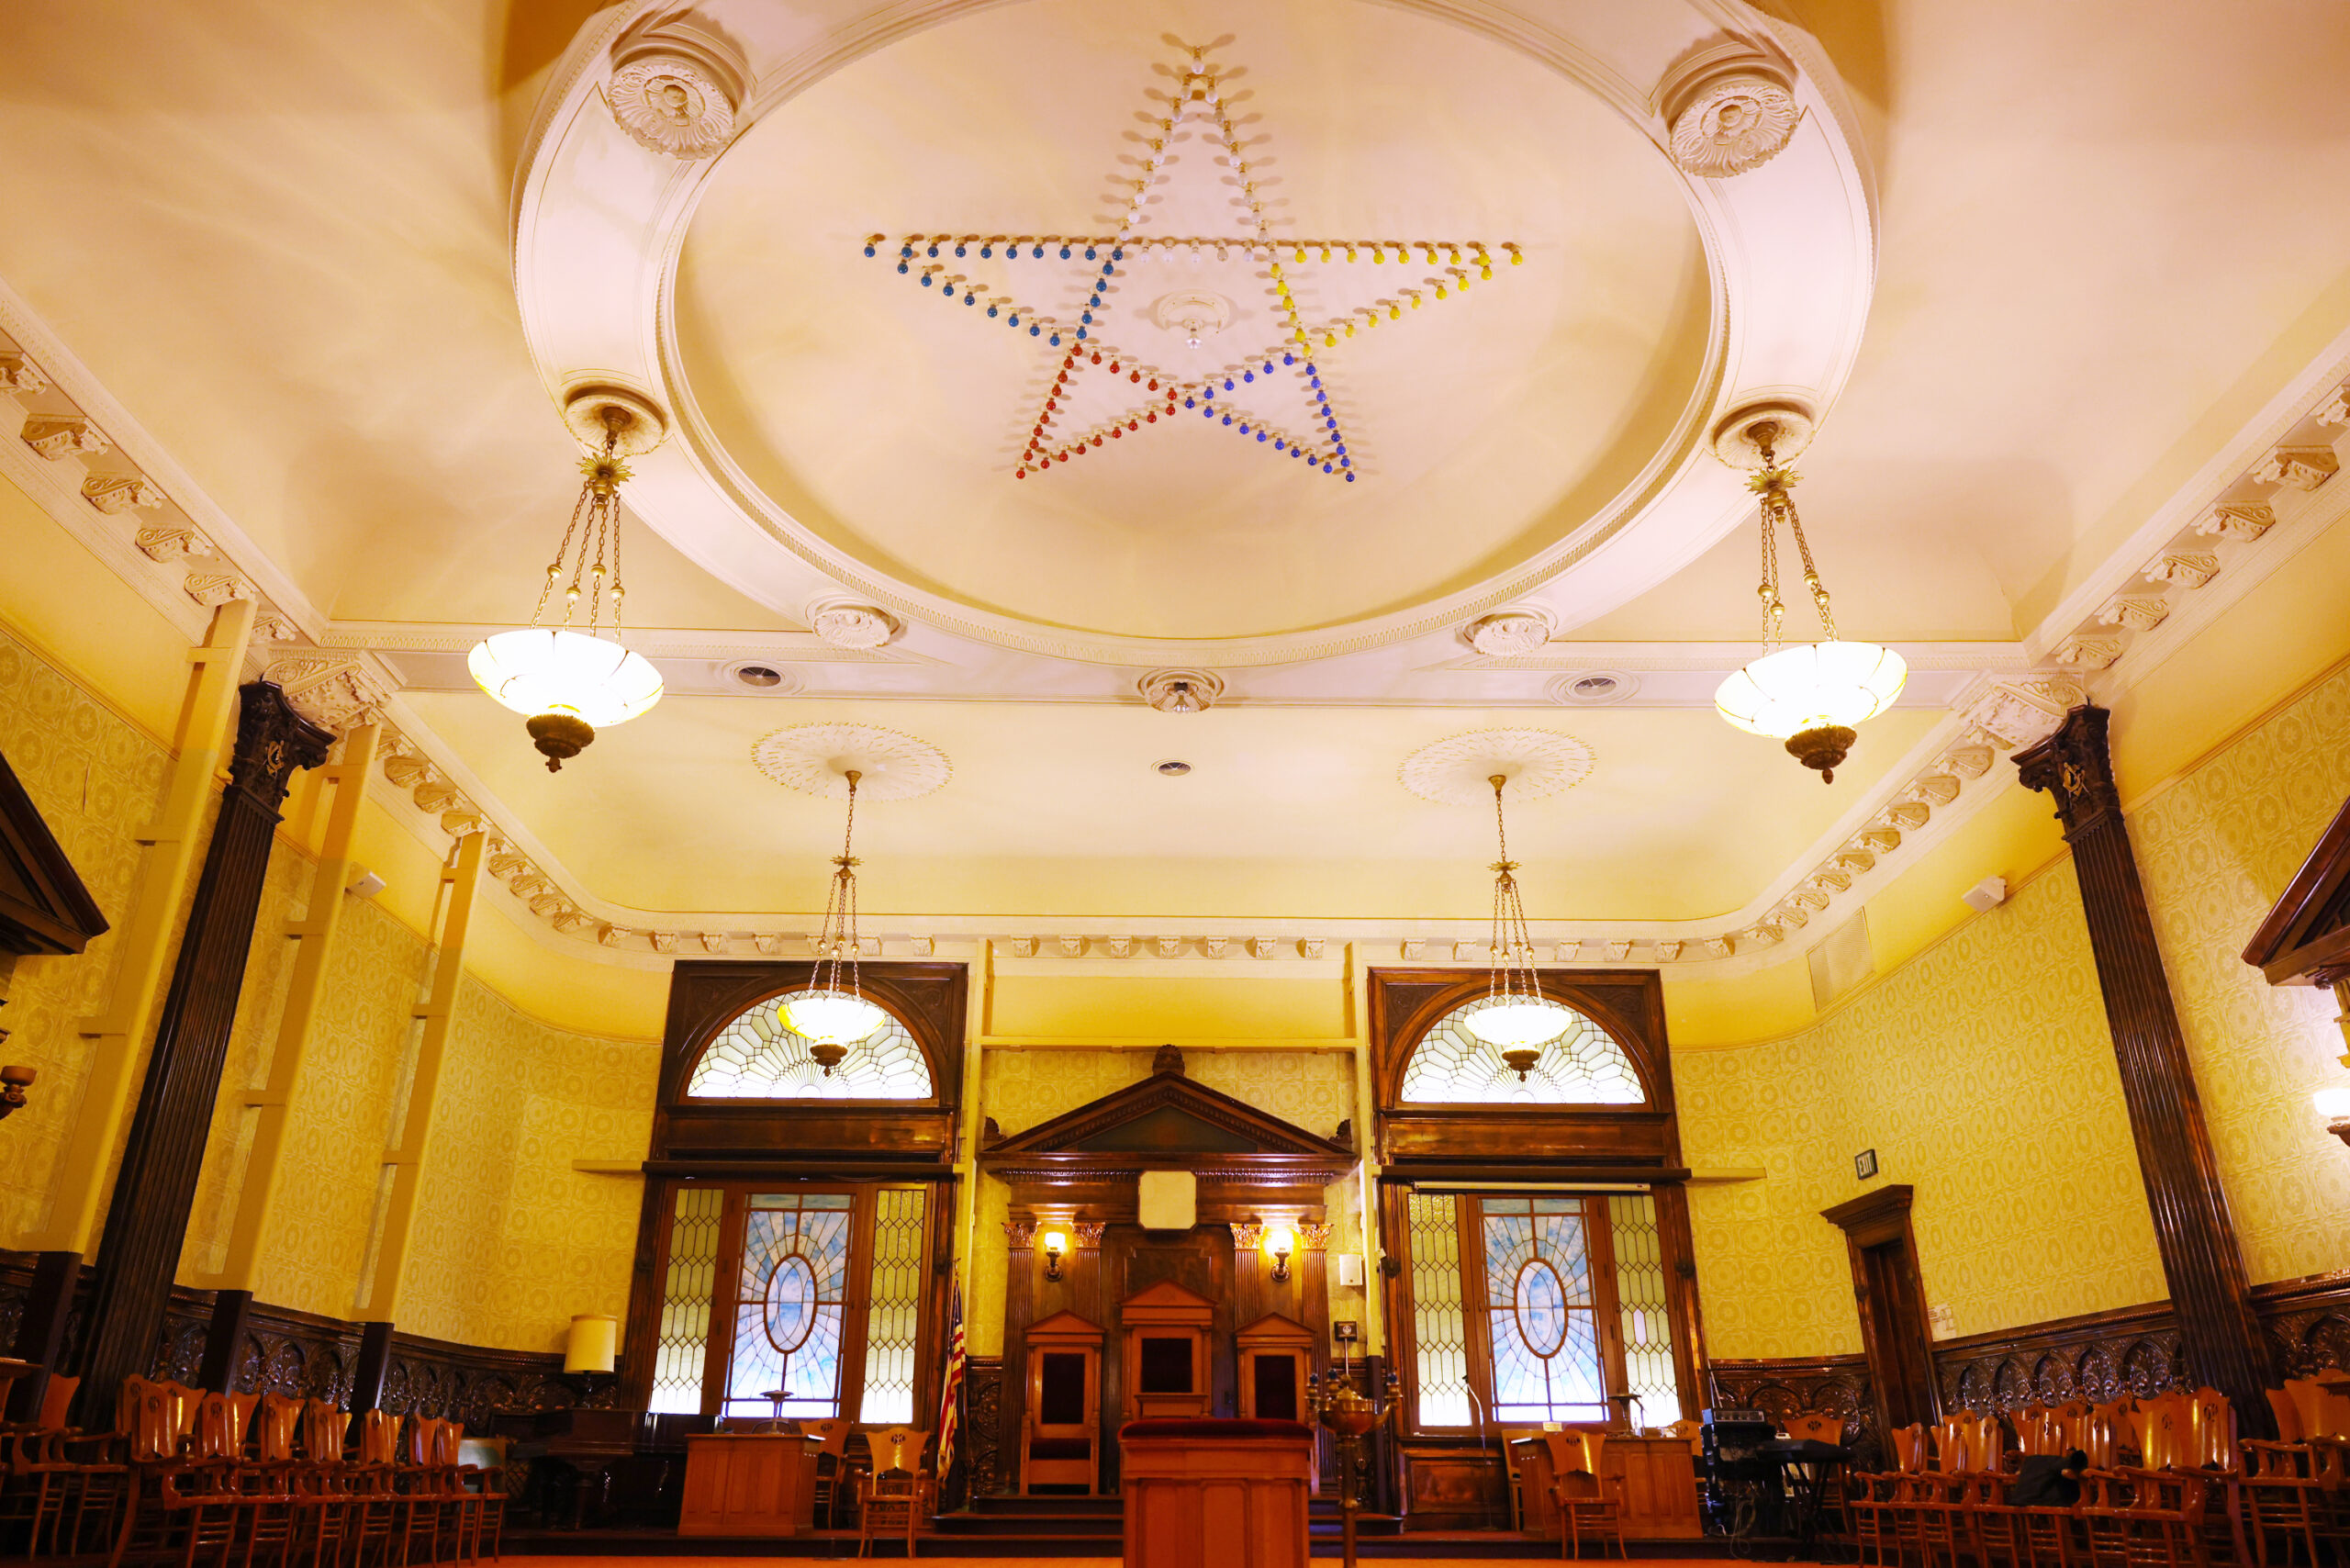 Inside San Francisco’s Masonic Halls and Fraternal Lodges, Mystery and Majesty Abound